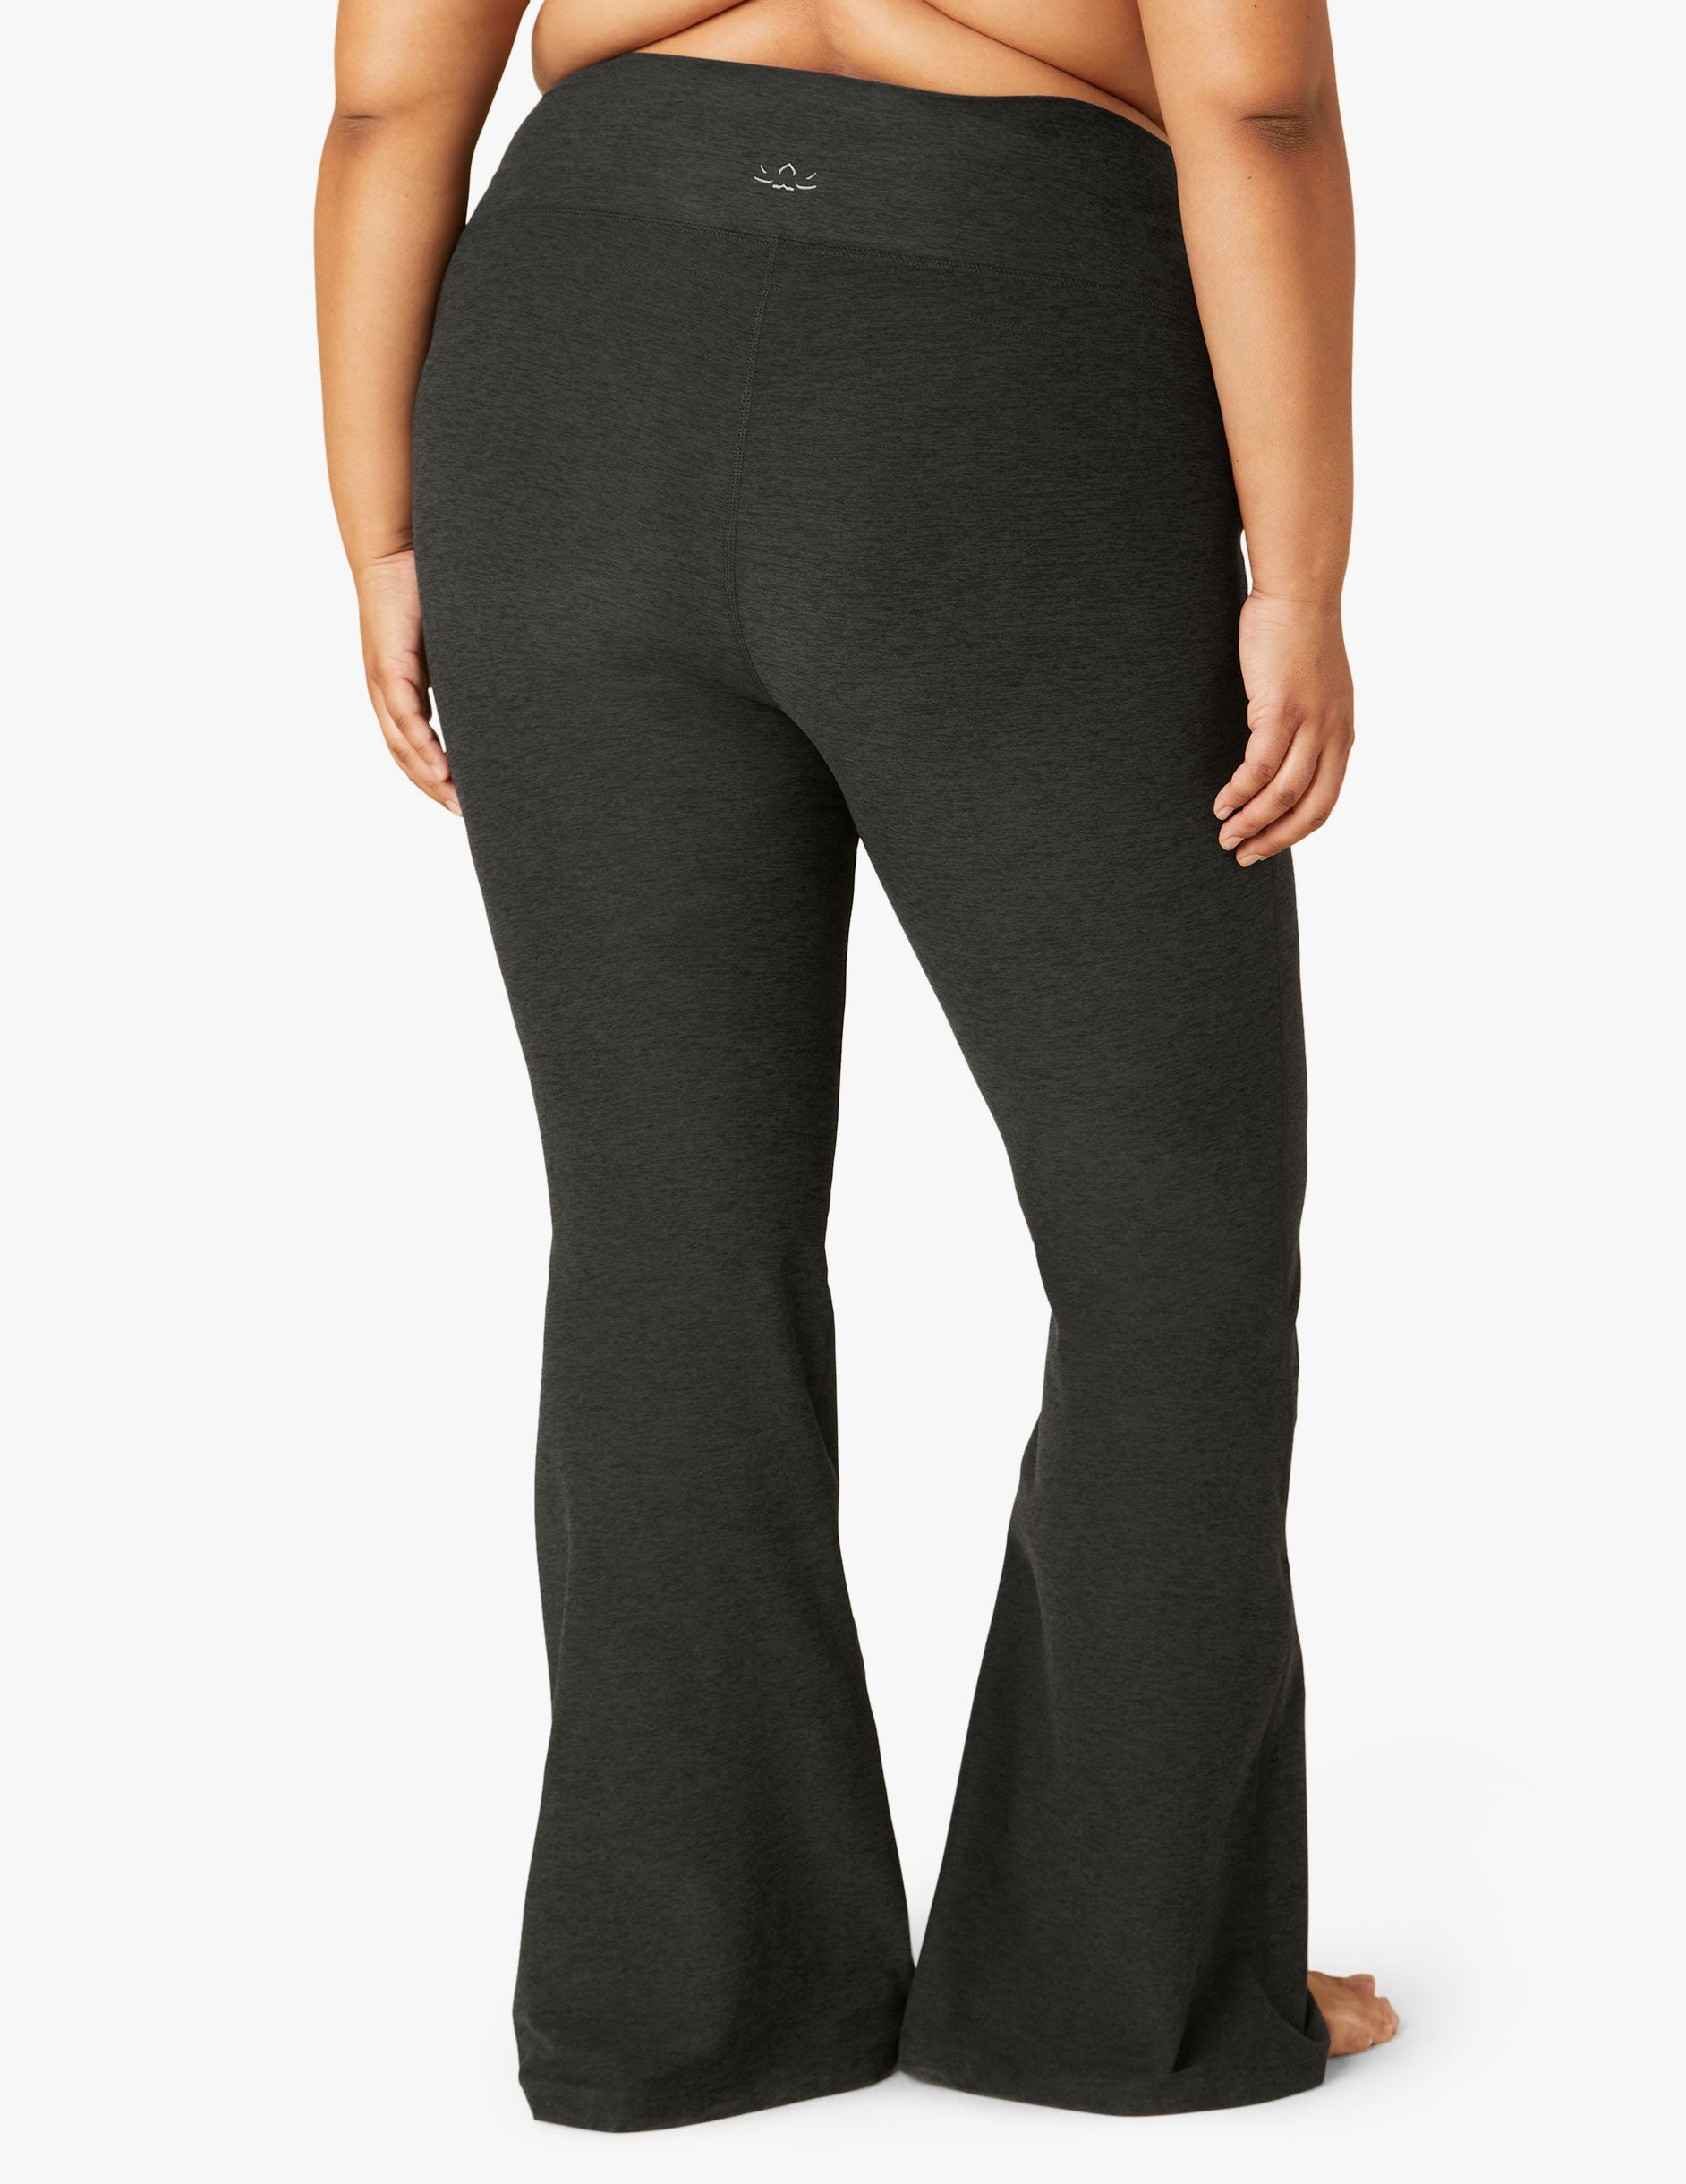 10 Flared Yoga Pants At Every Price Point Parade, 52% OFF